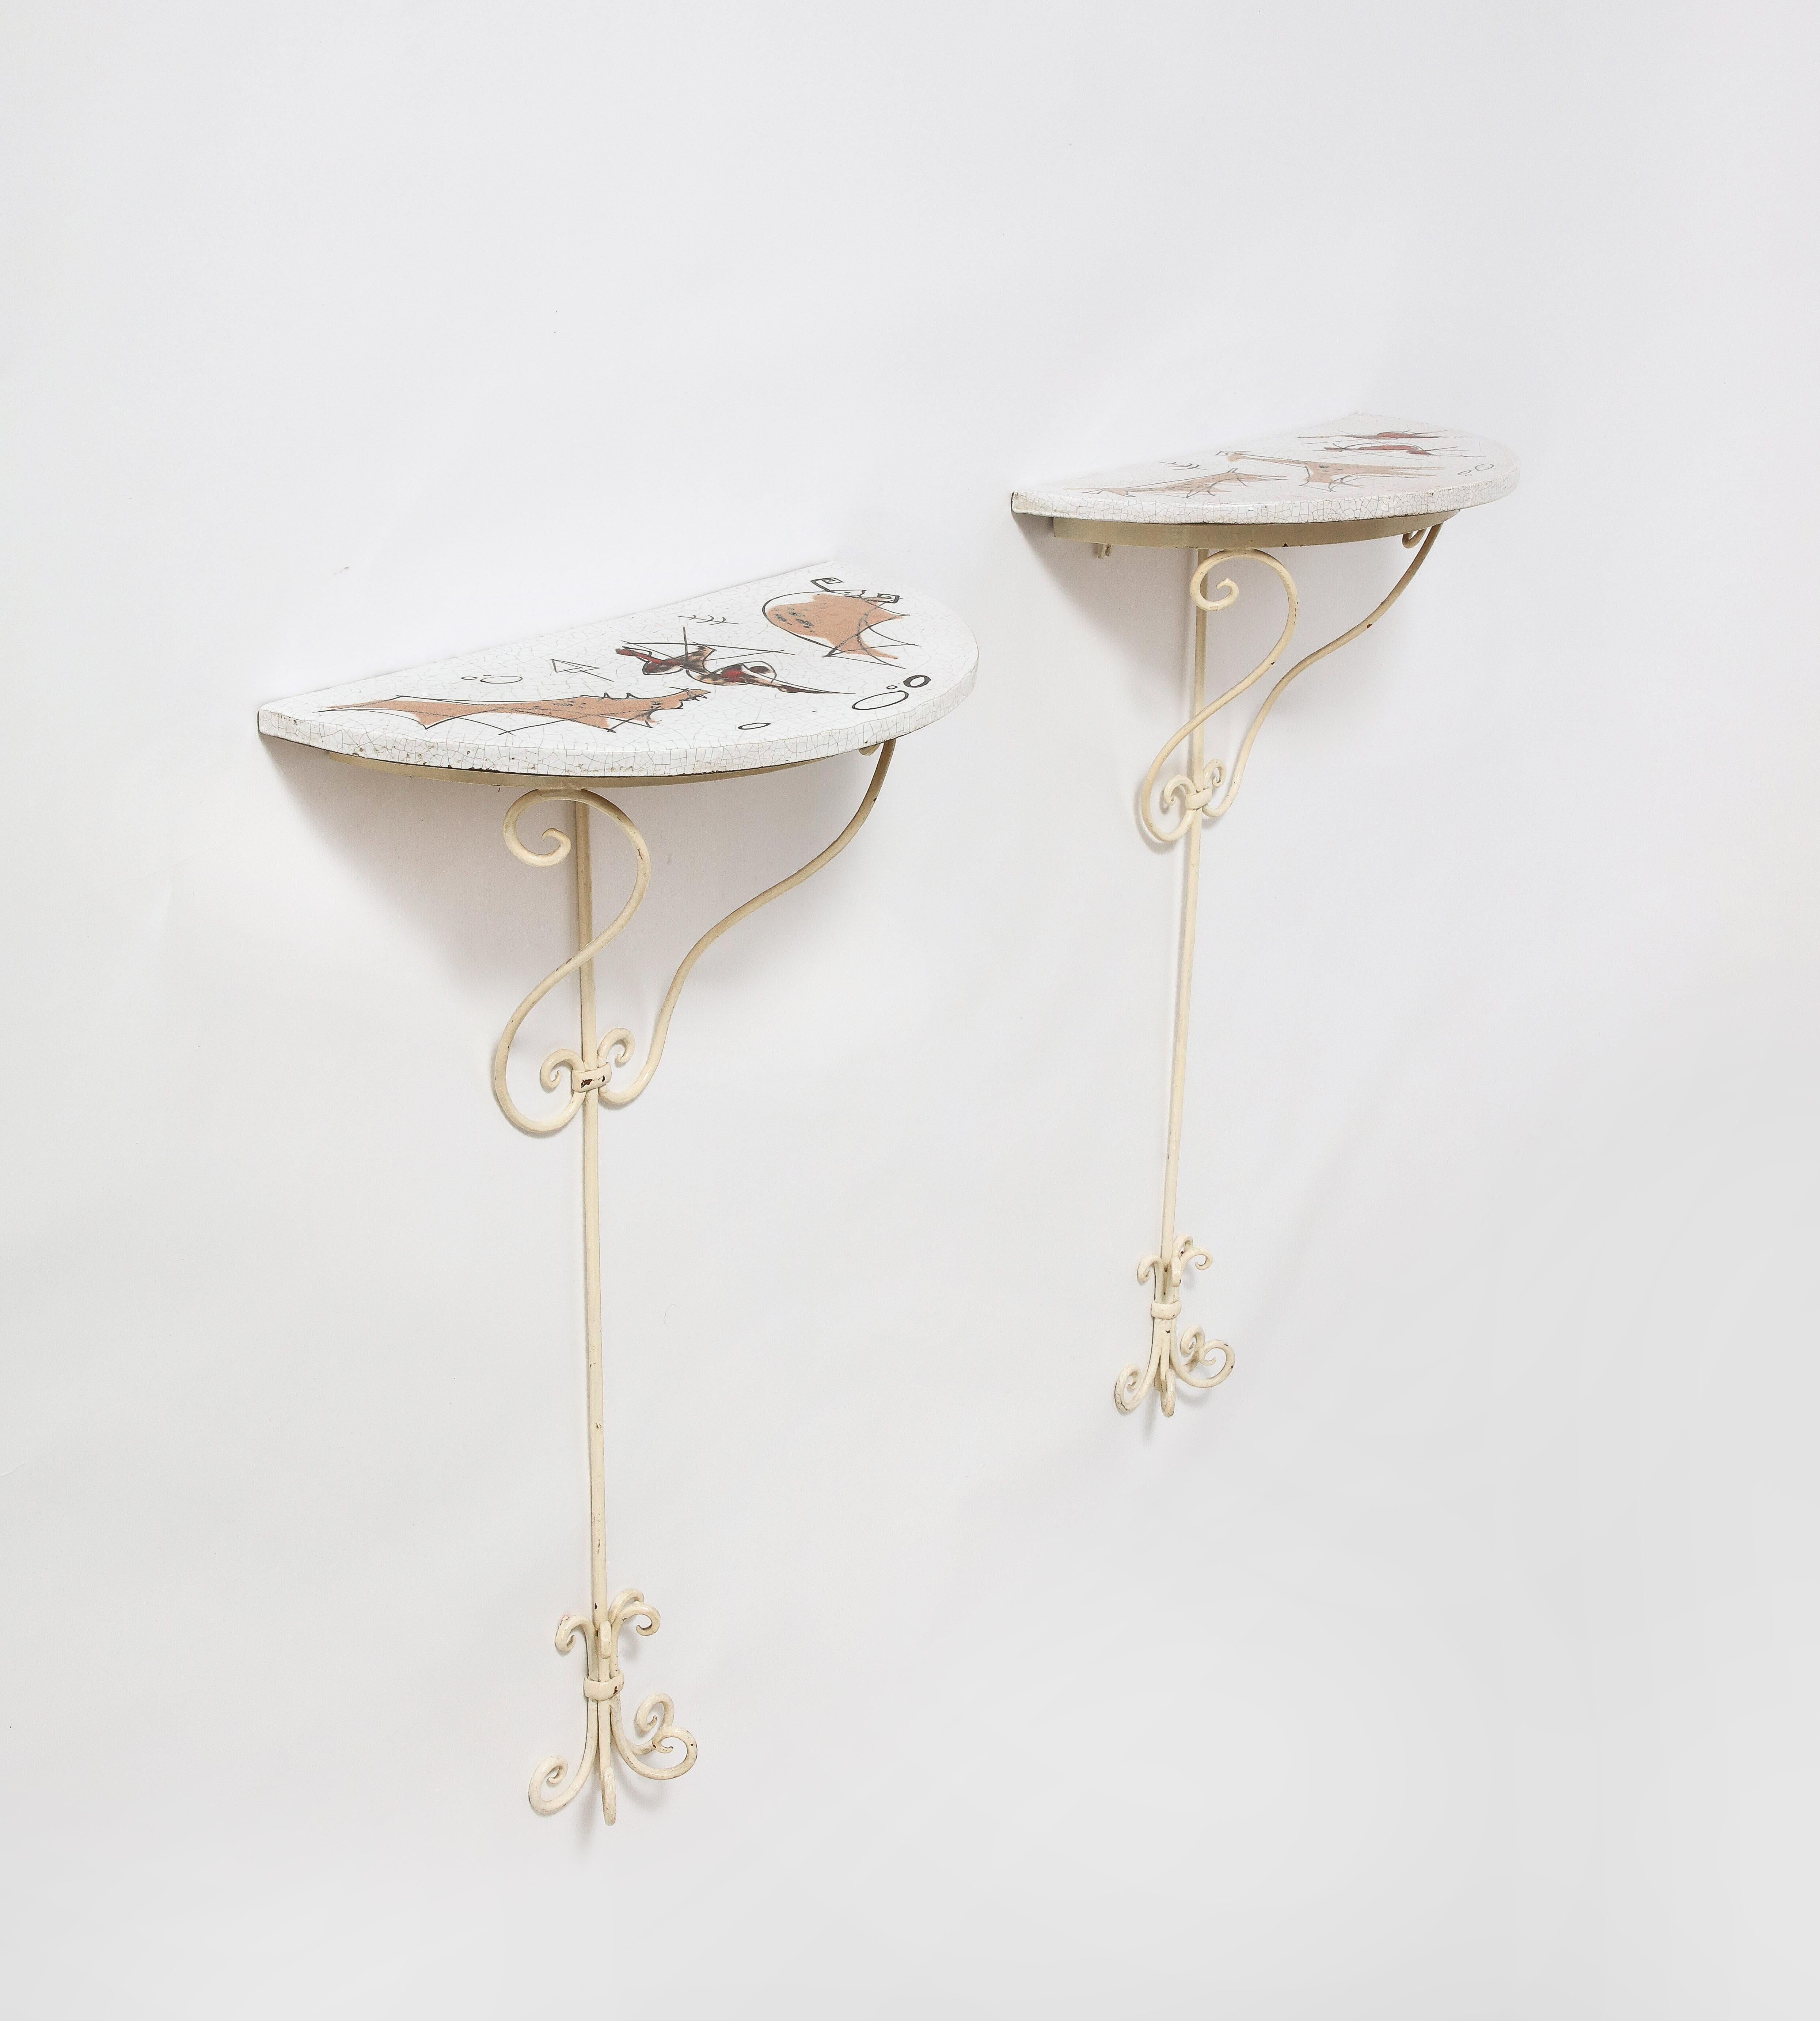 Arnaldo Miniati Pair of Ceramic and Iron Demi-Lune Wall Consoles, Italy, 1959 For Sale 2